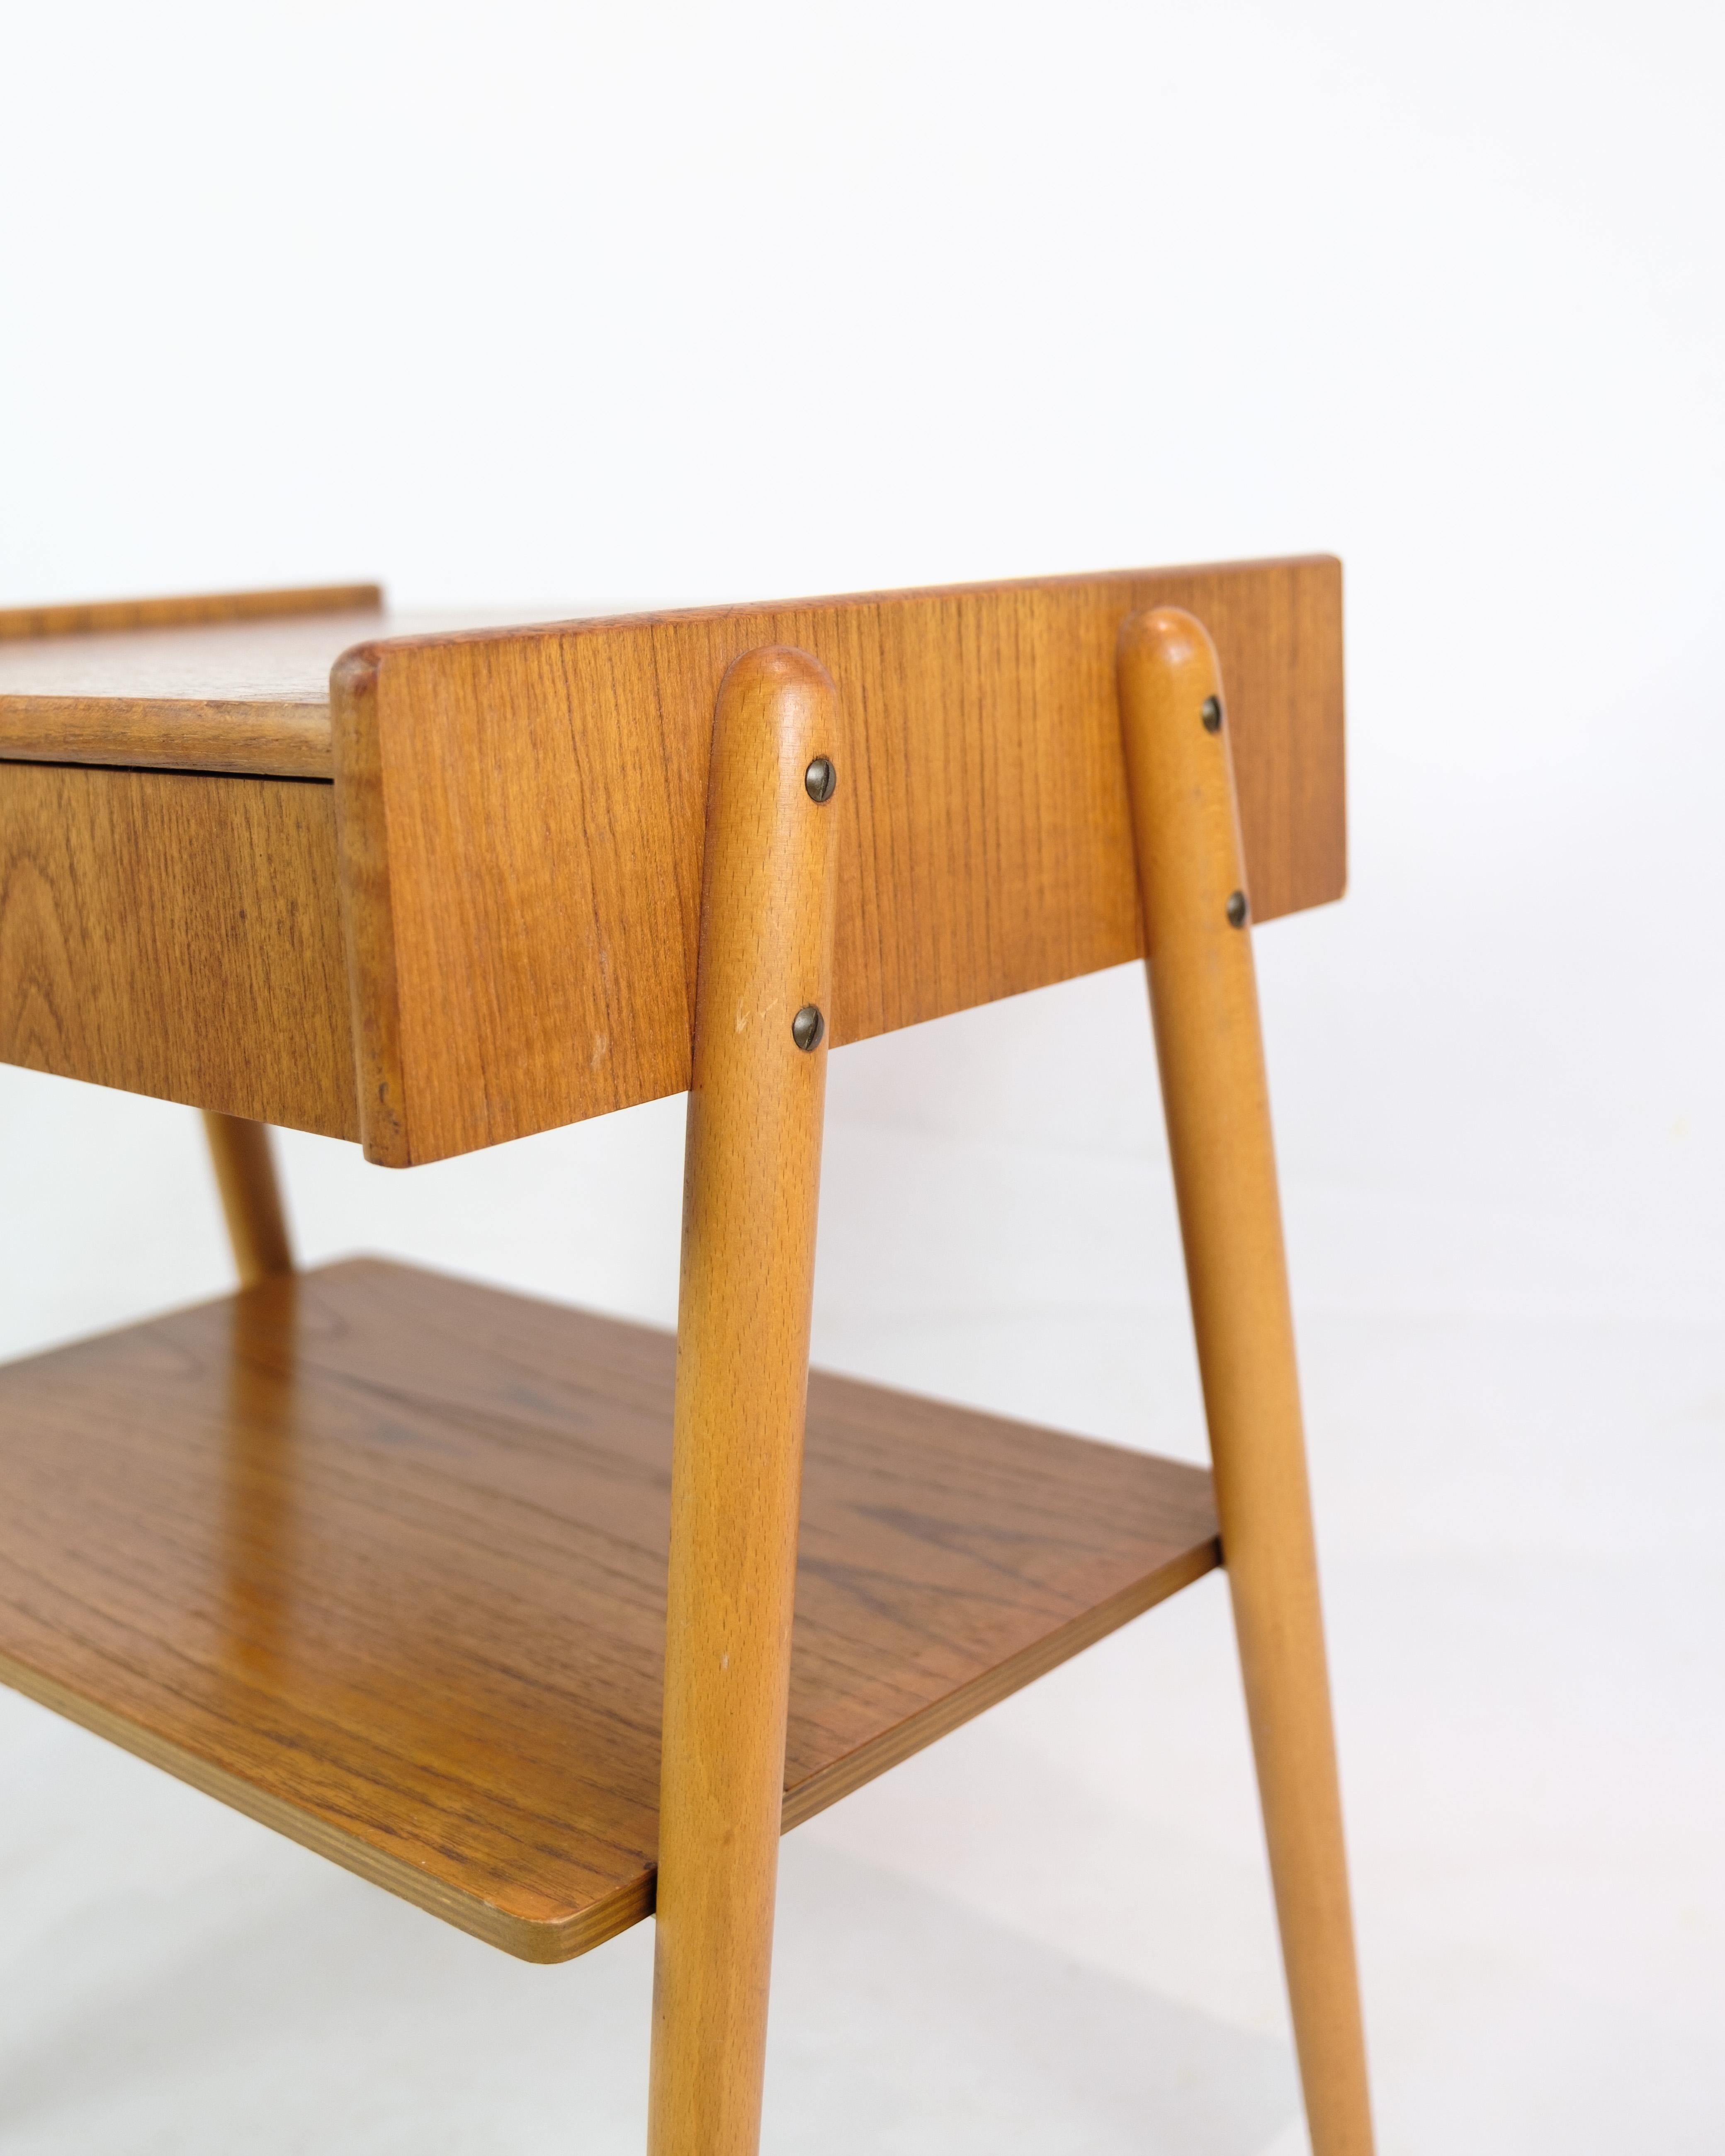 Set of Nightstands In Teak, By AB Carlström & Co Furniture Factory From 1950s For Sale 5